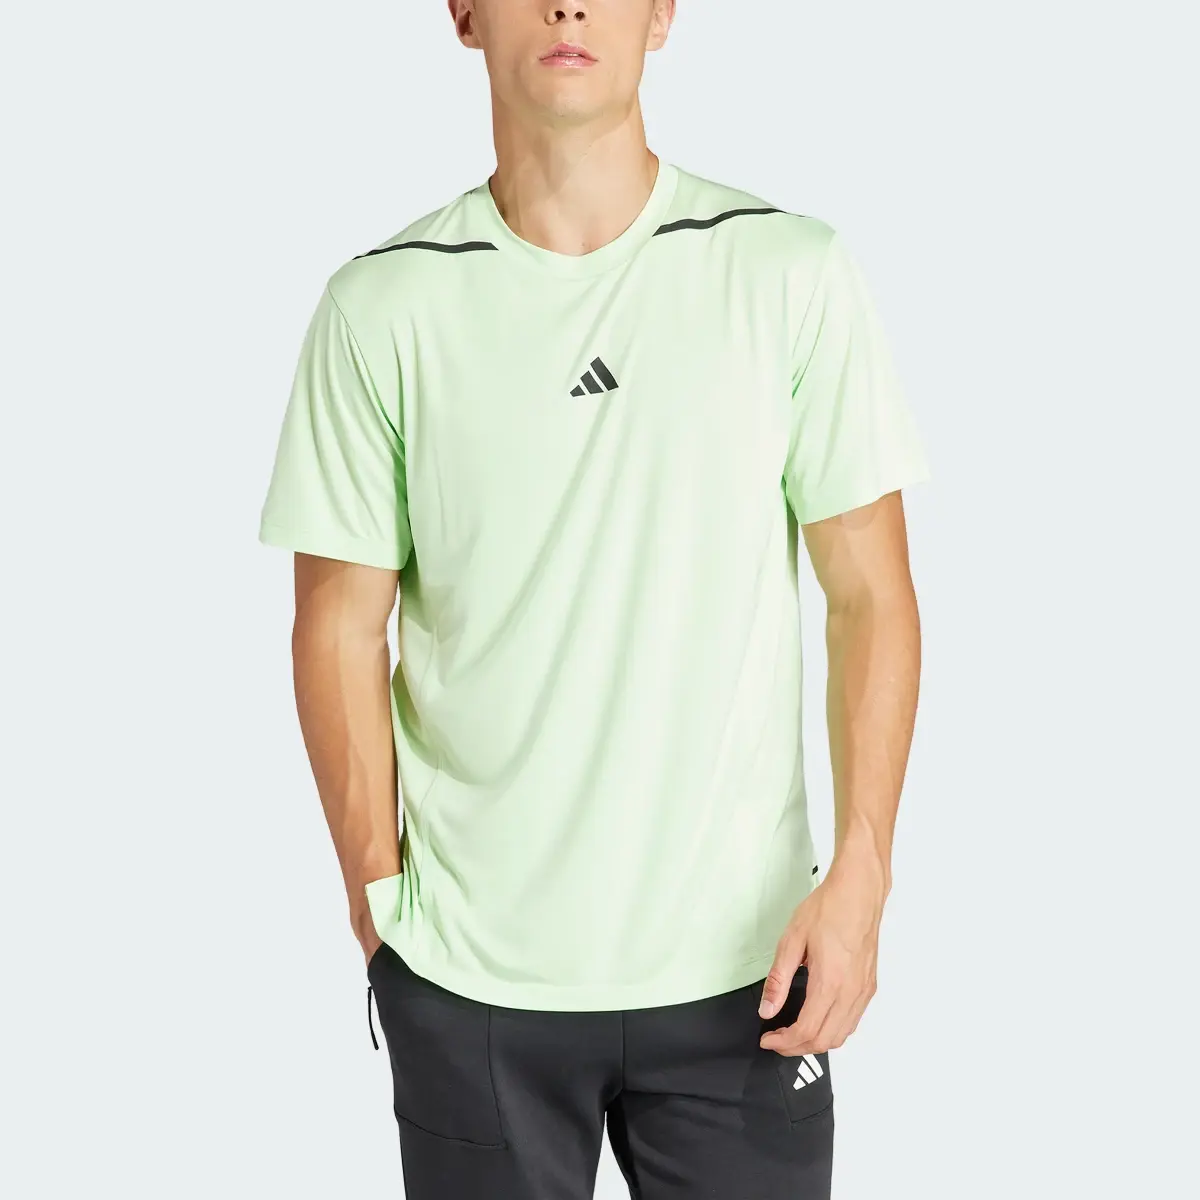 Adidas Designed for Training Adistrong Workout Tee. 1